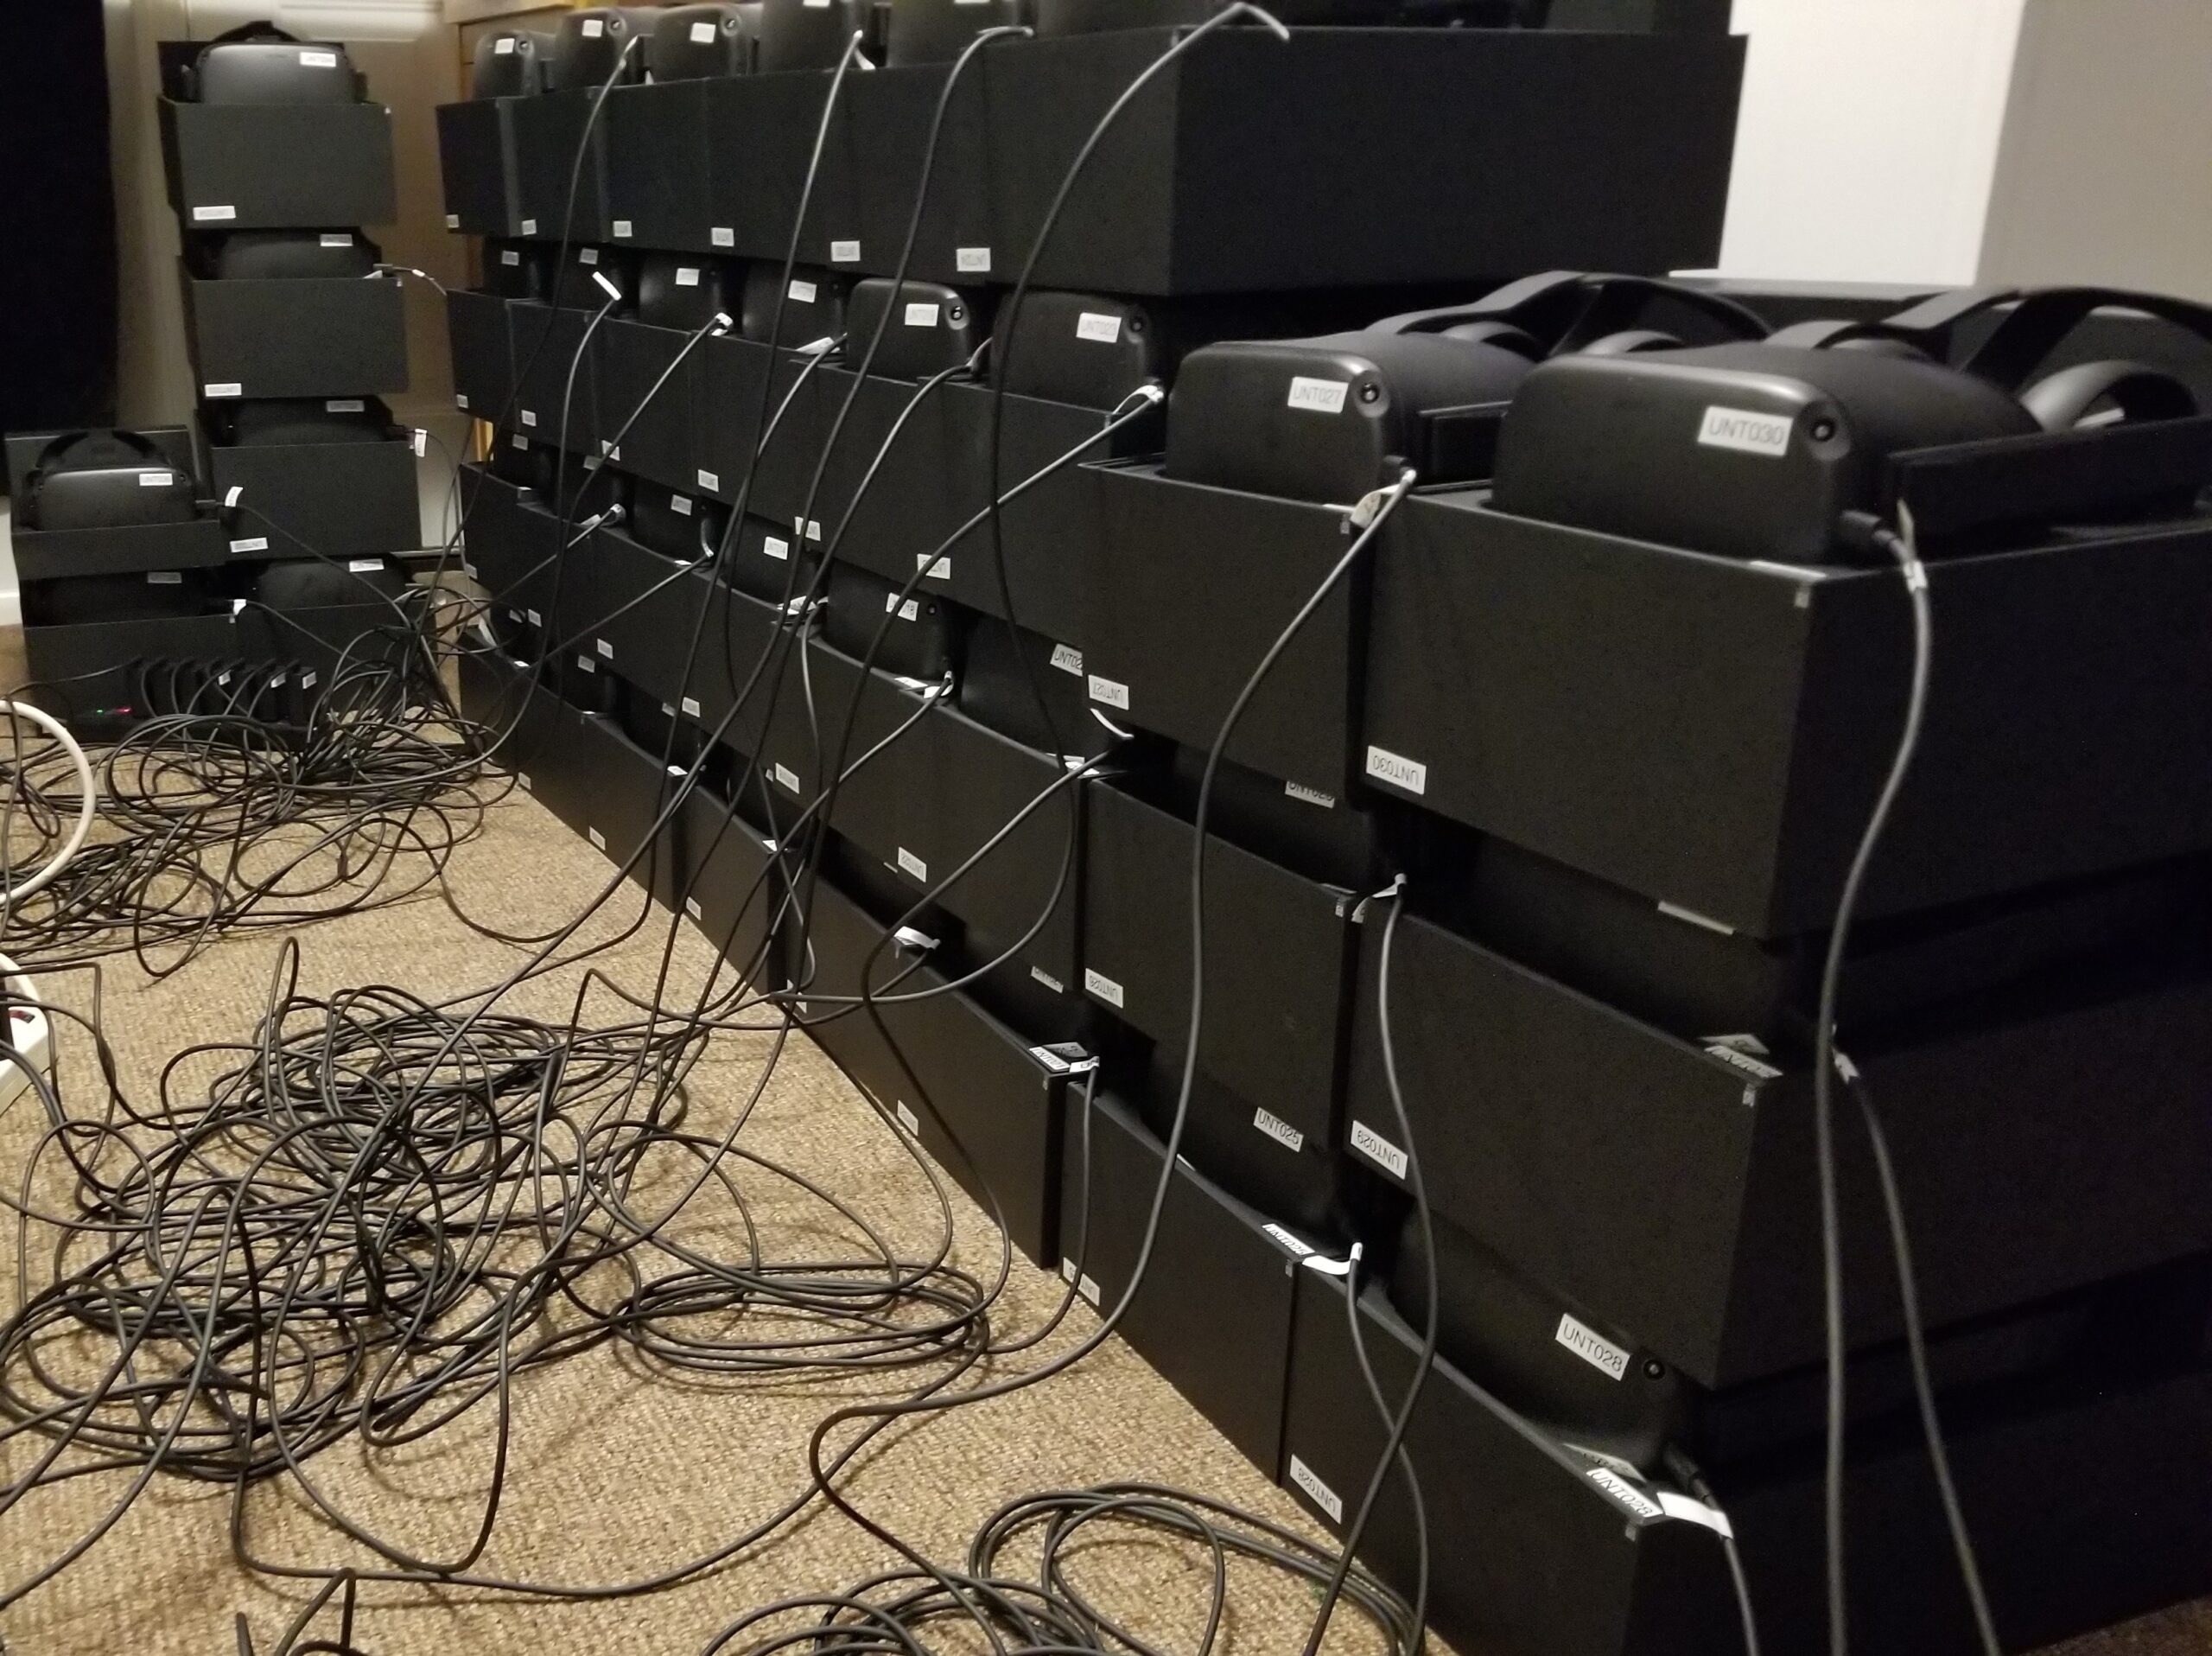 36 Meta Quest headsets are charging for the last time before they are used at University of North Texas Health Science Center in Fort Worth, in 2019